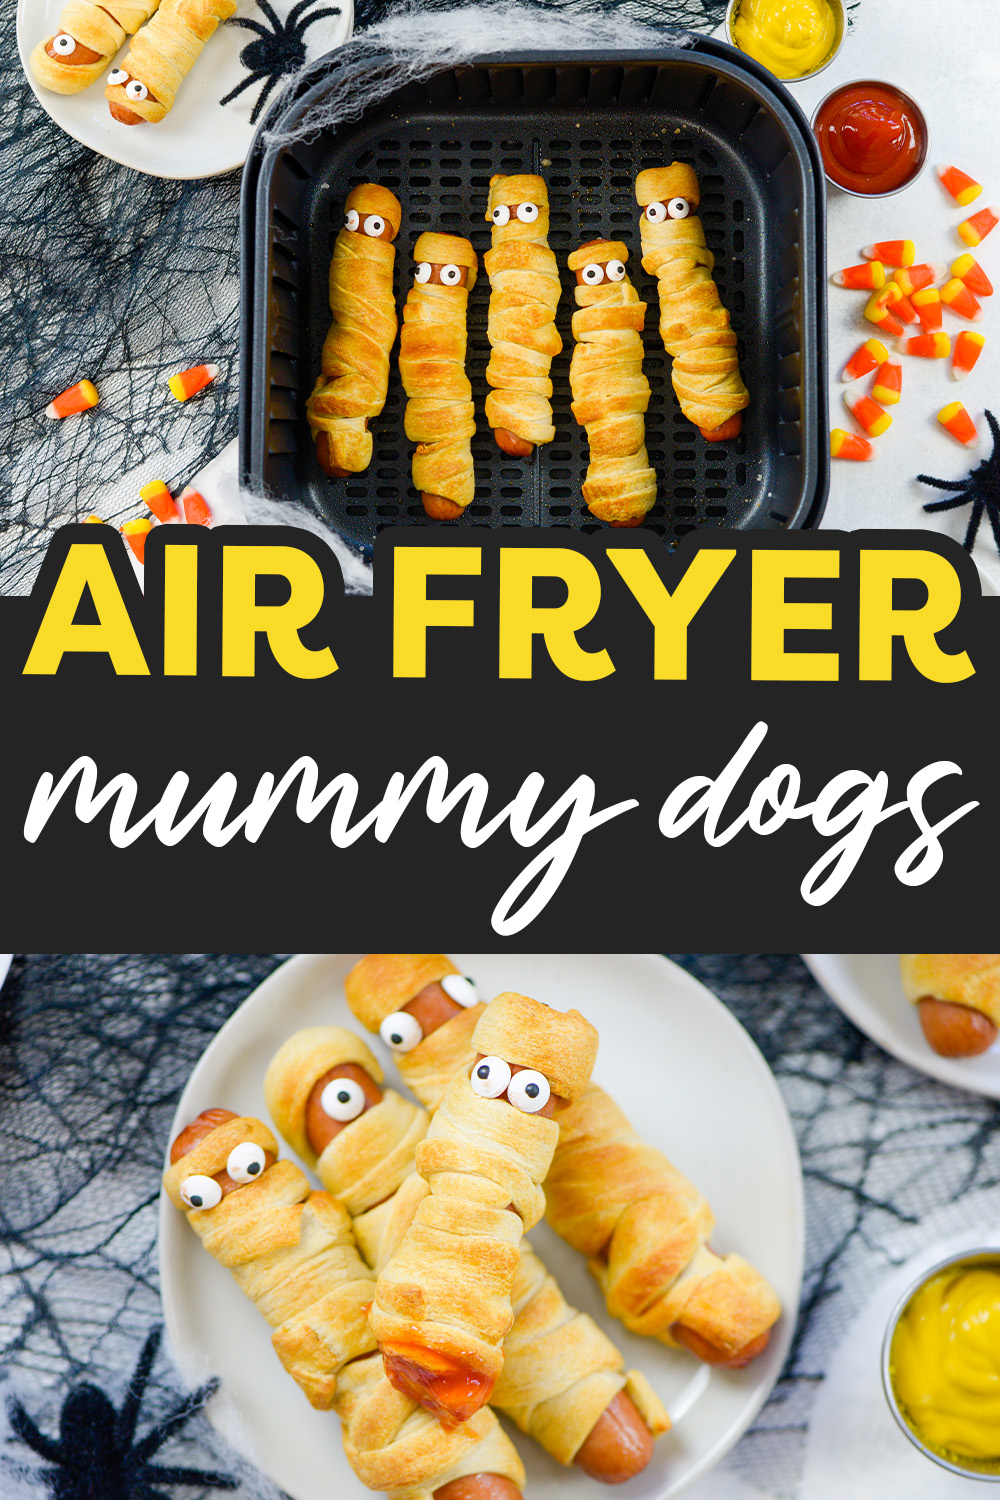 These are the cutest mummy dogs I have ever had!  We made these in the air fryer with a modified pigs in the blanket recipe.  Sure to be a hit at your Halloween gathering!